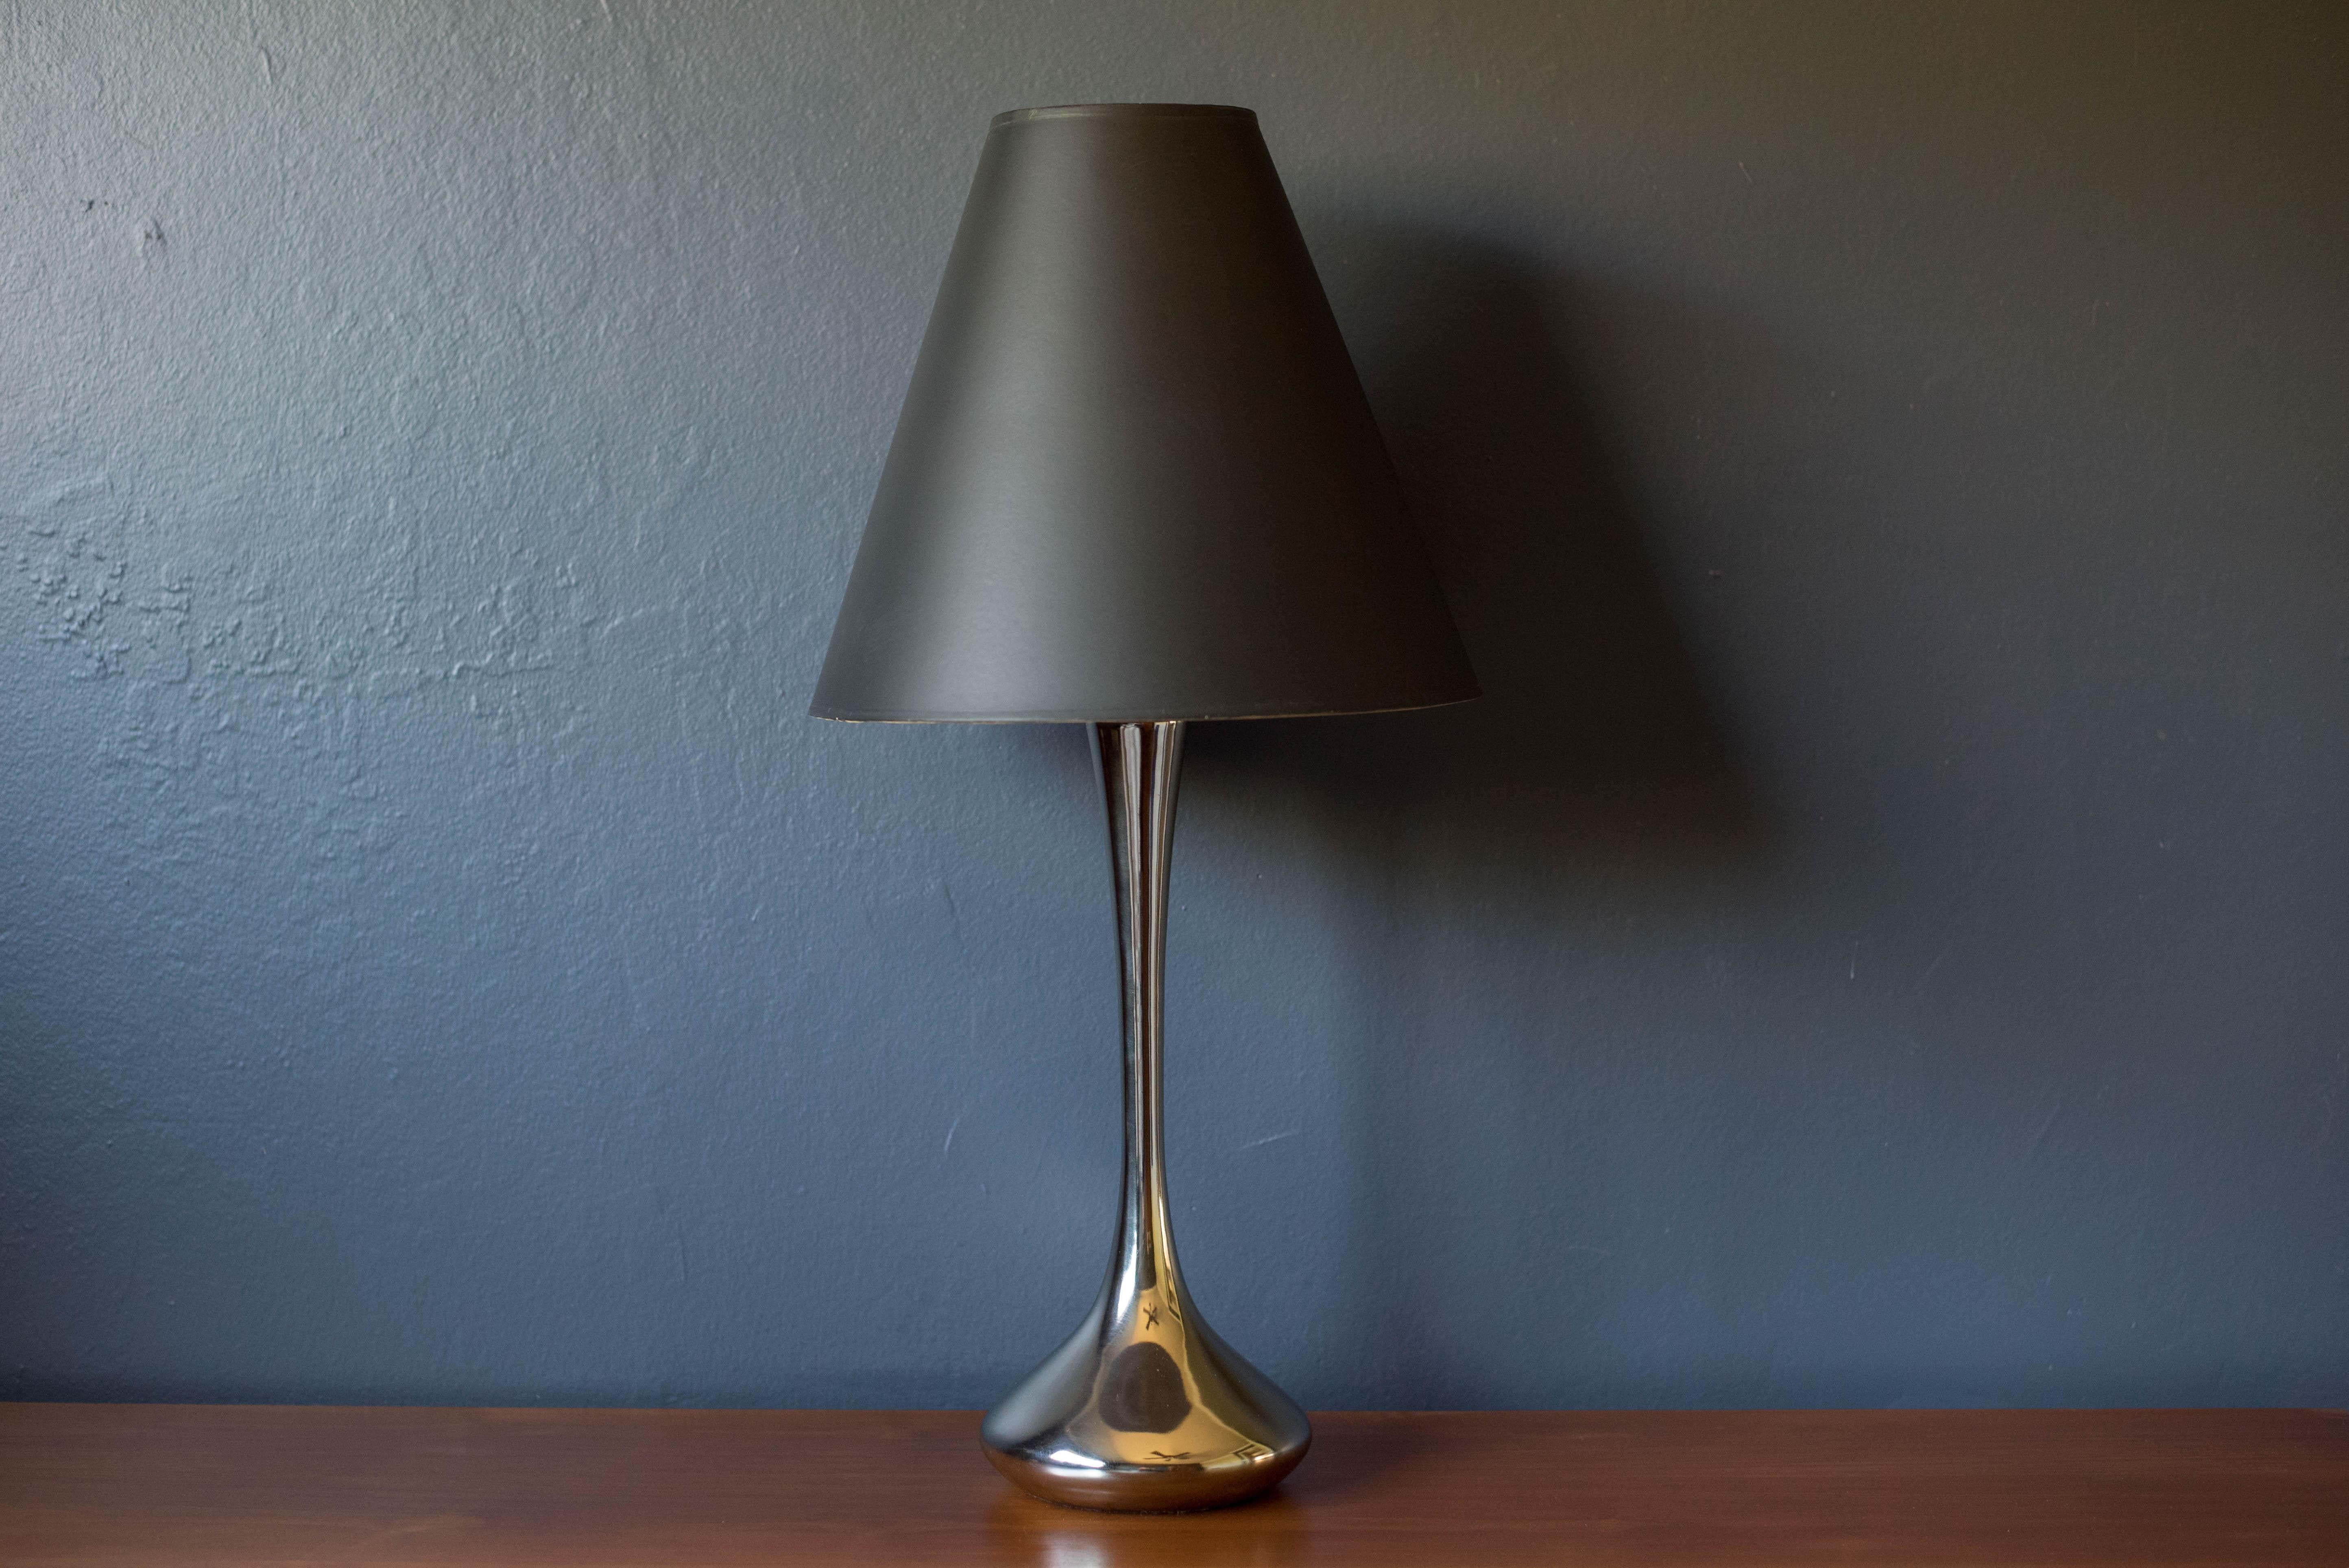 Vintage accent table light manufactured by Laurel Lamp Co in polished chrome. Features a sculptural teardrop style weighted base equipped with a three way switch. Includes the original black paper shade. 

Shade 17